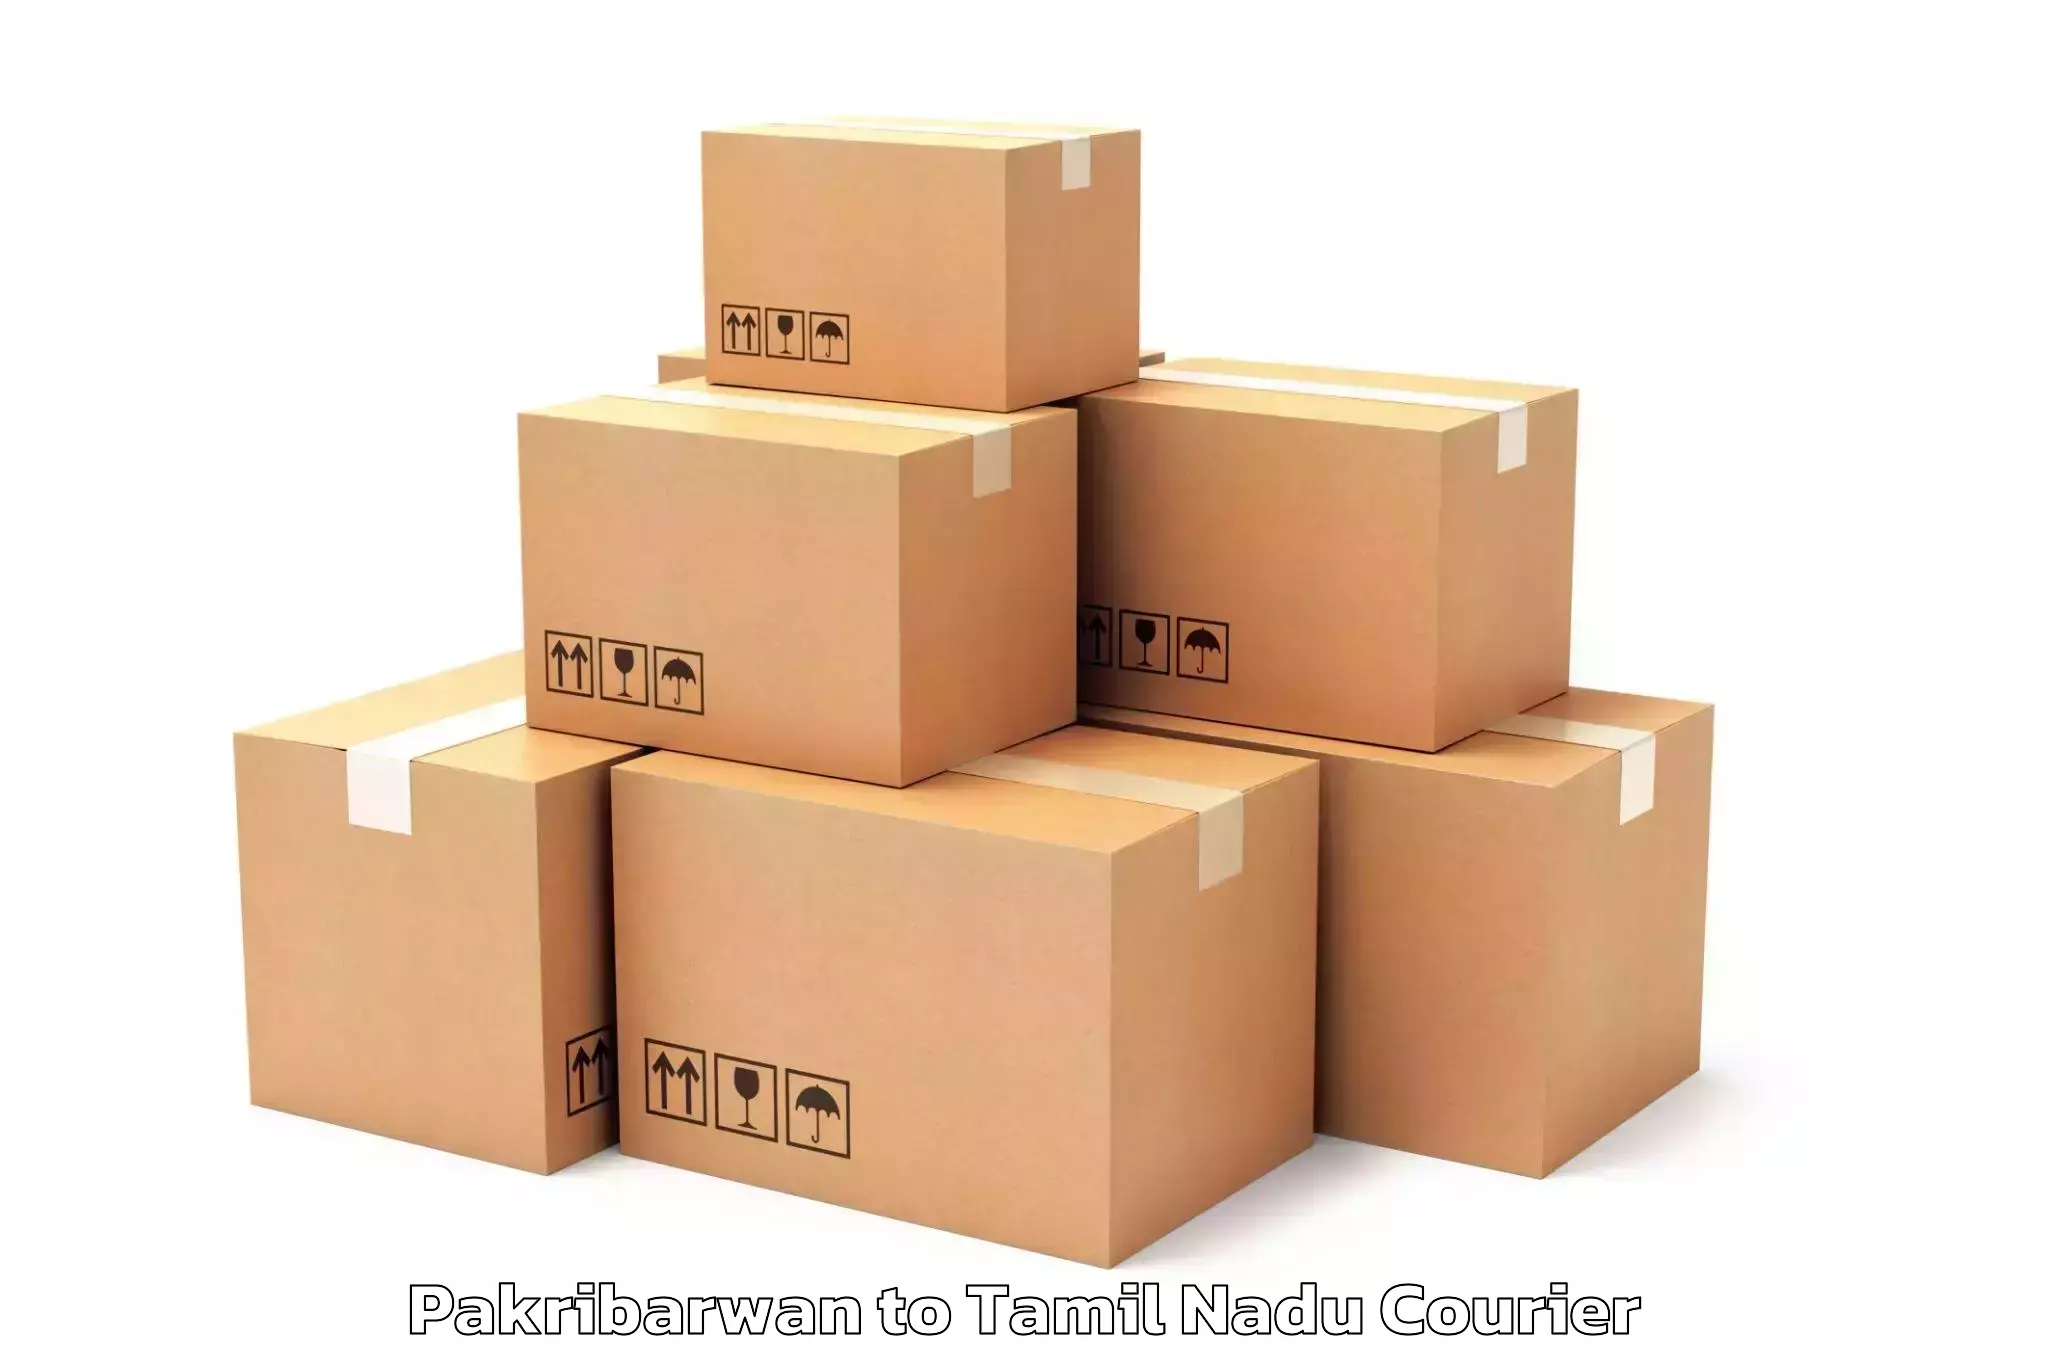 Professional movers and packers Pakribarwan to Gingee